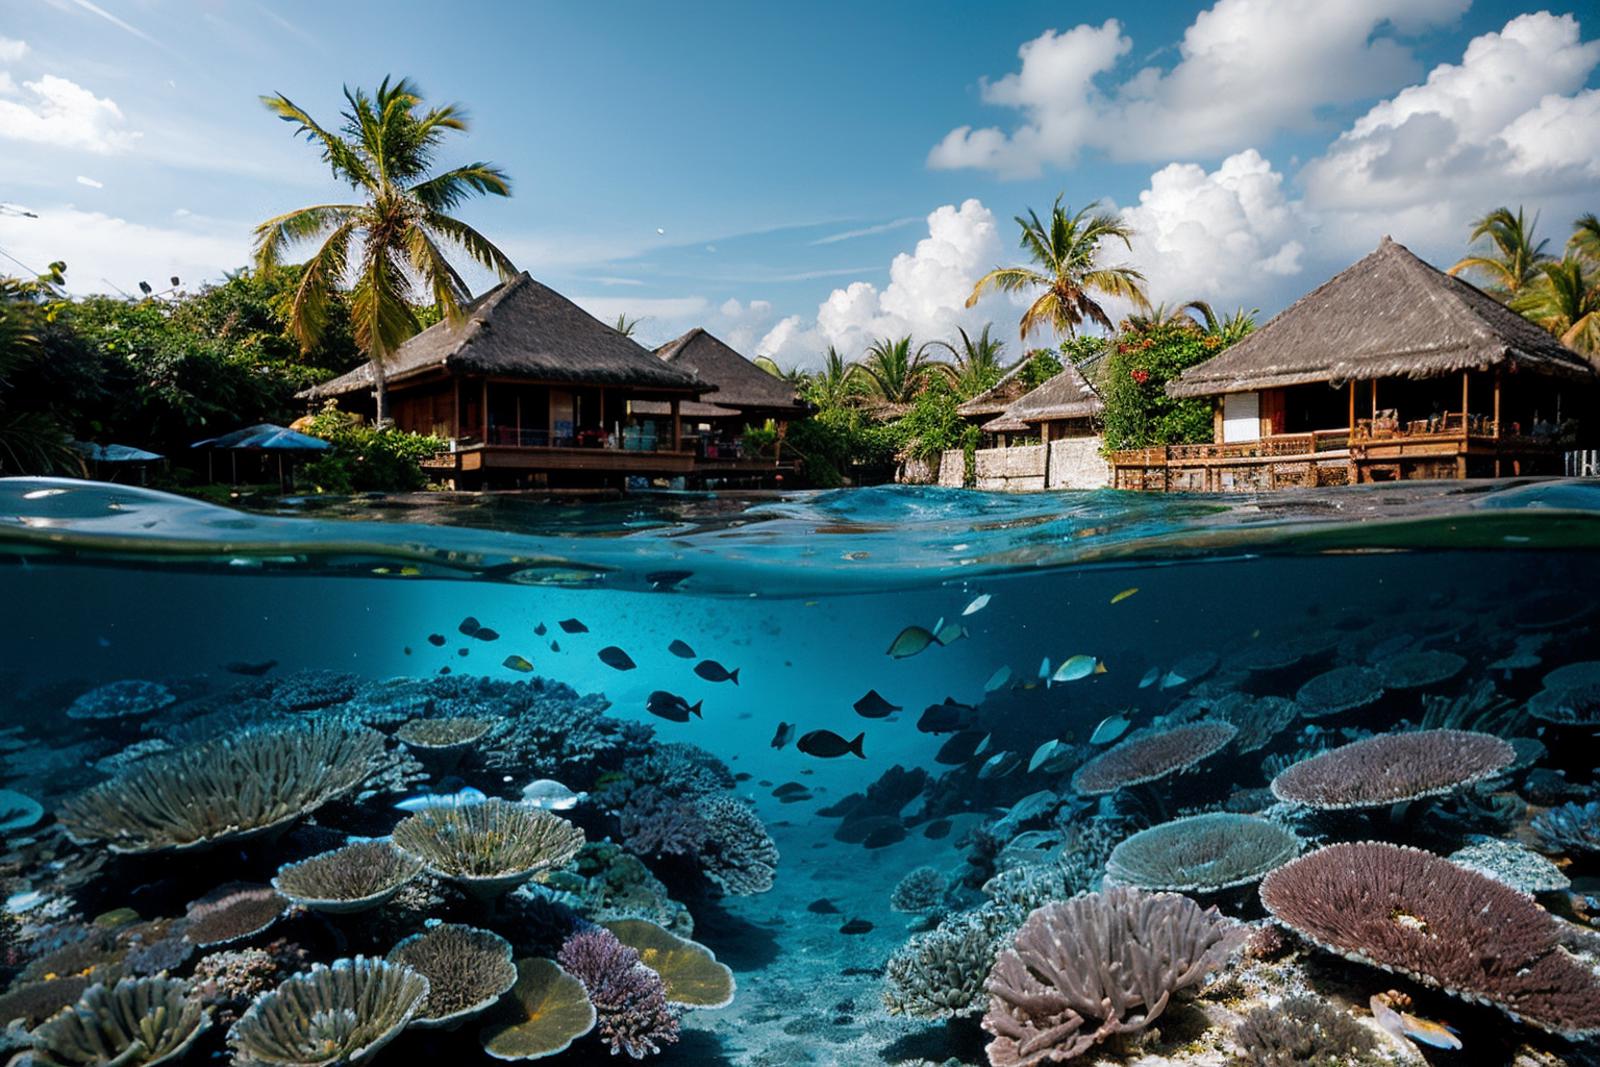 A beautiful underwater scene with a variety of fish, coral, and tropical houses on the shore.